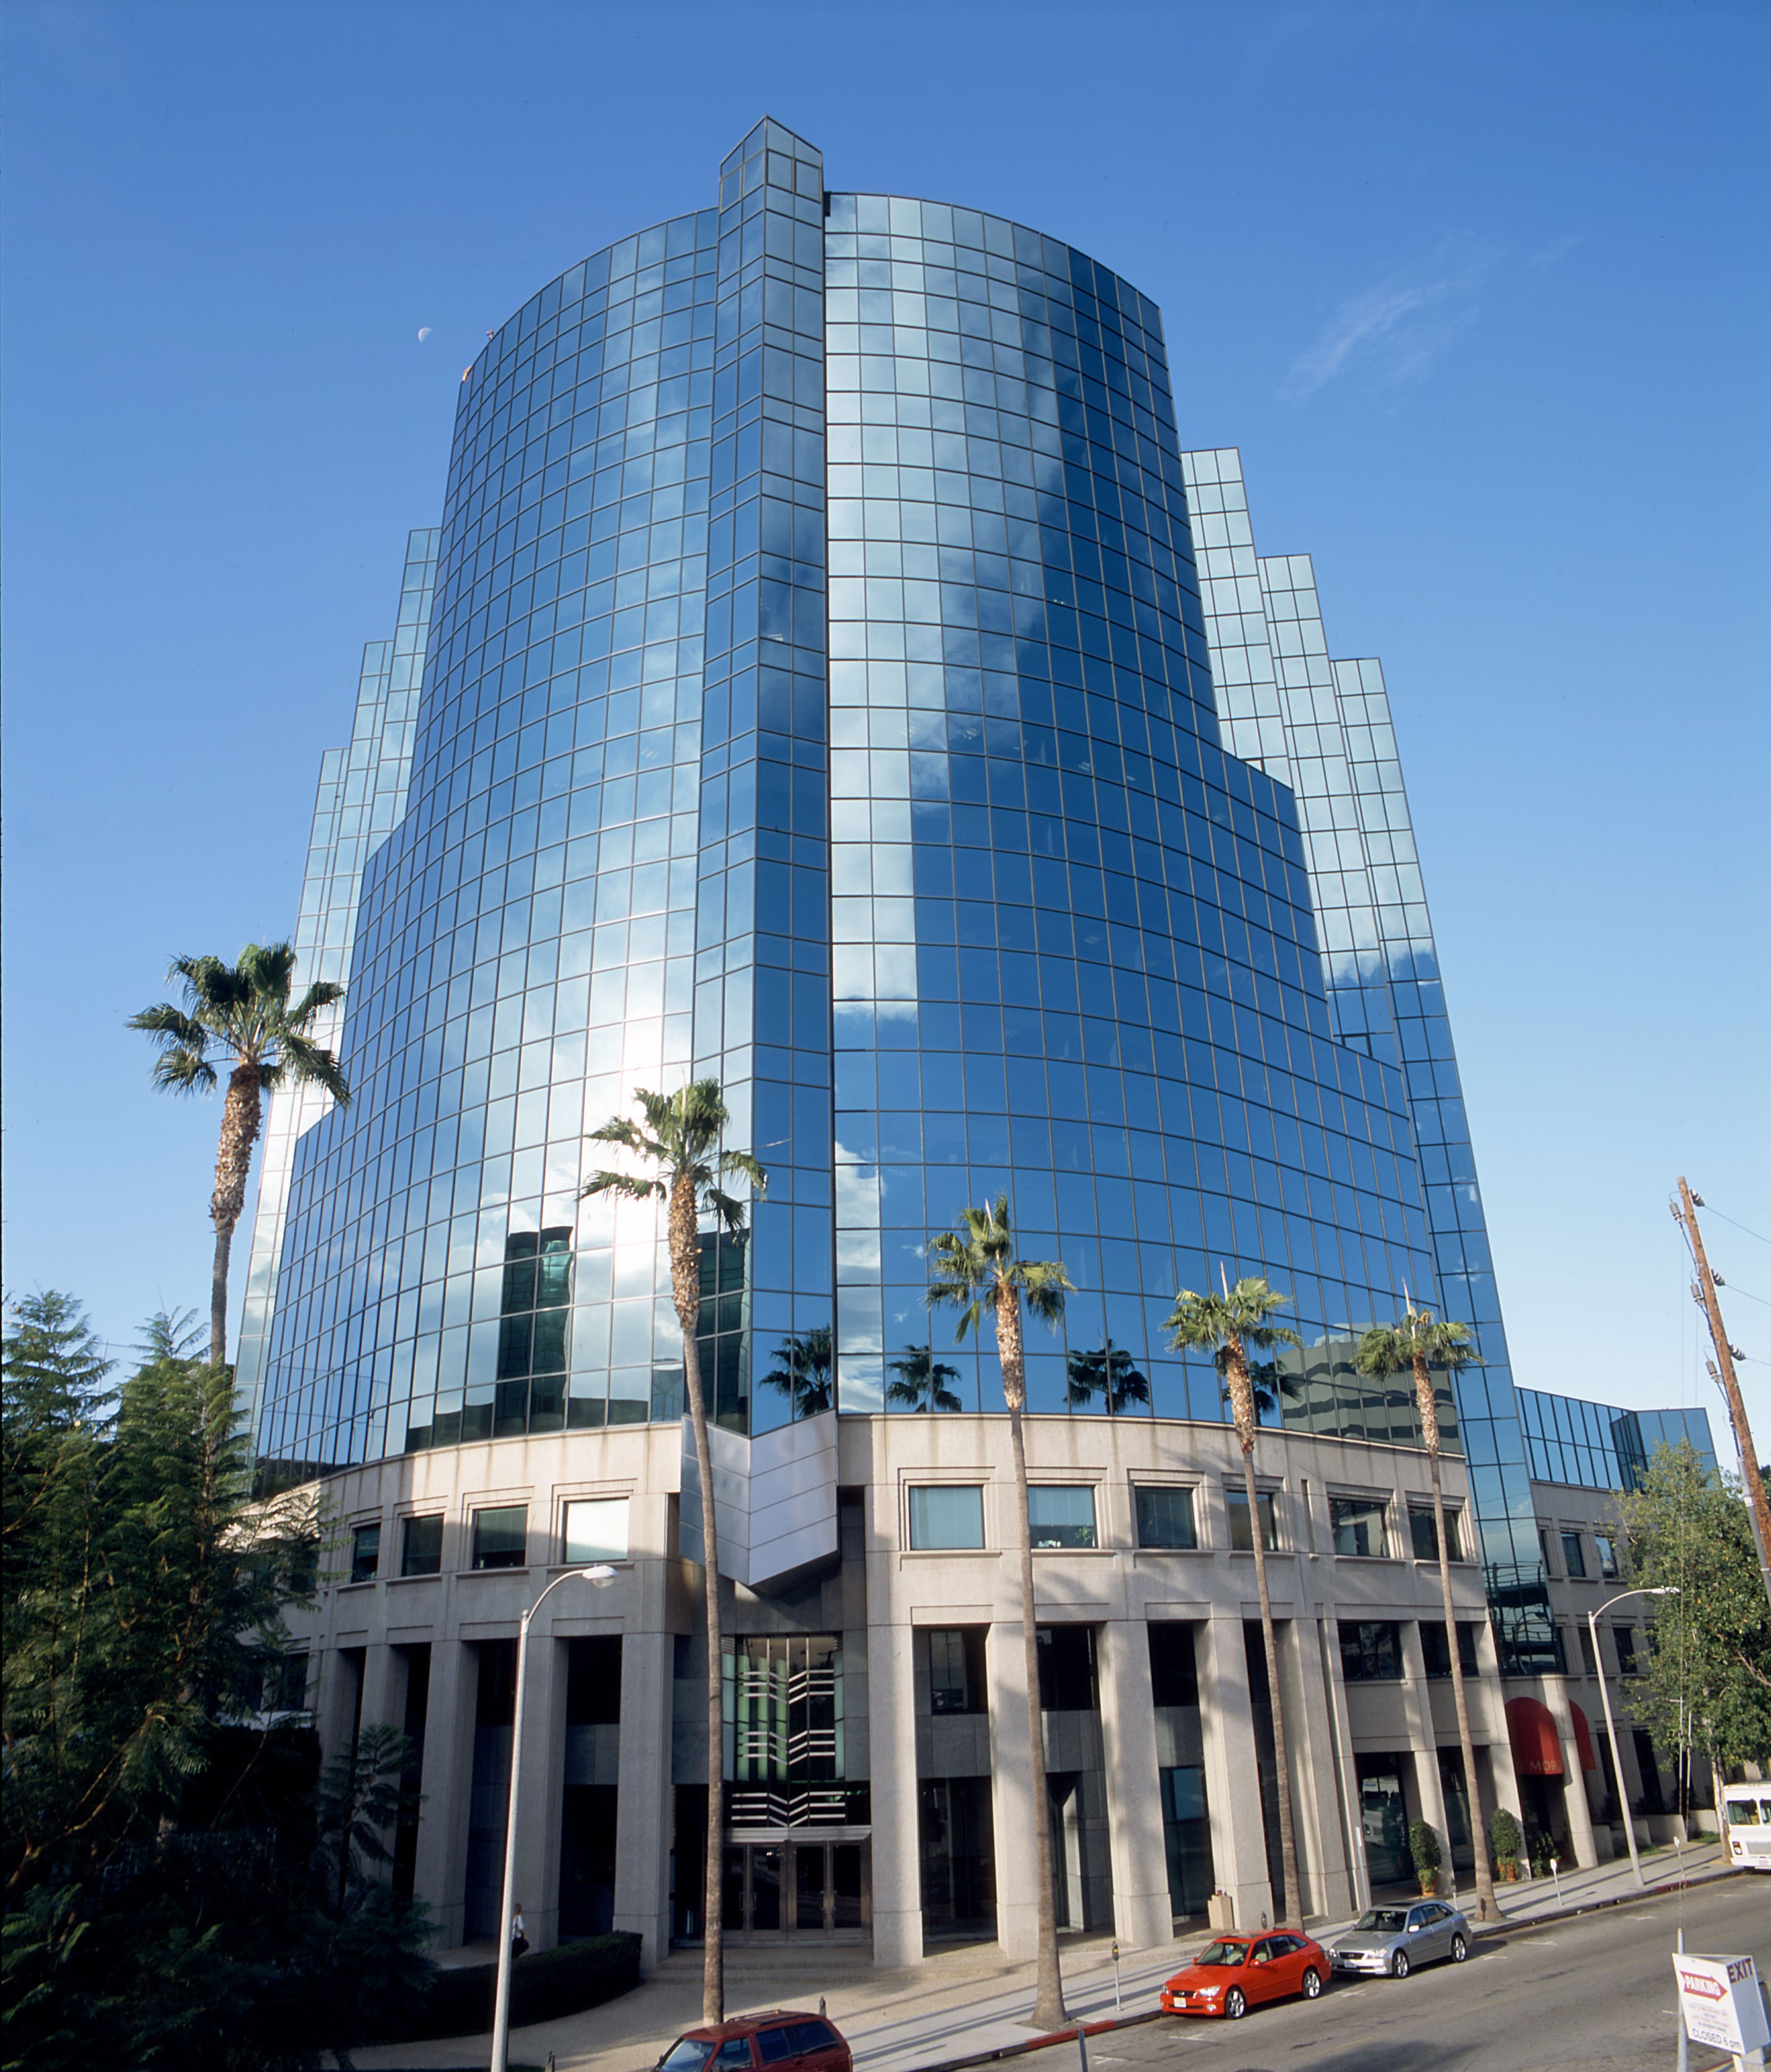 Premier Workspaces Executive Tower at 11400 West Olympic Boulevard